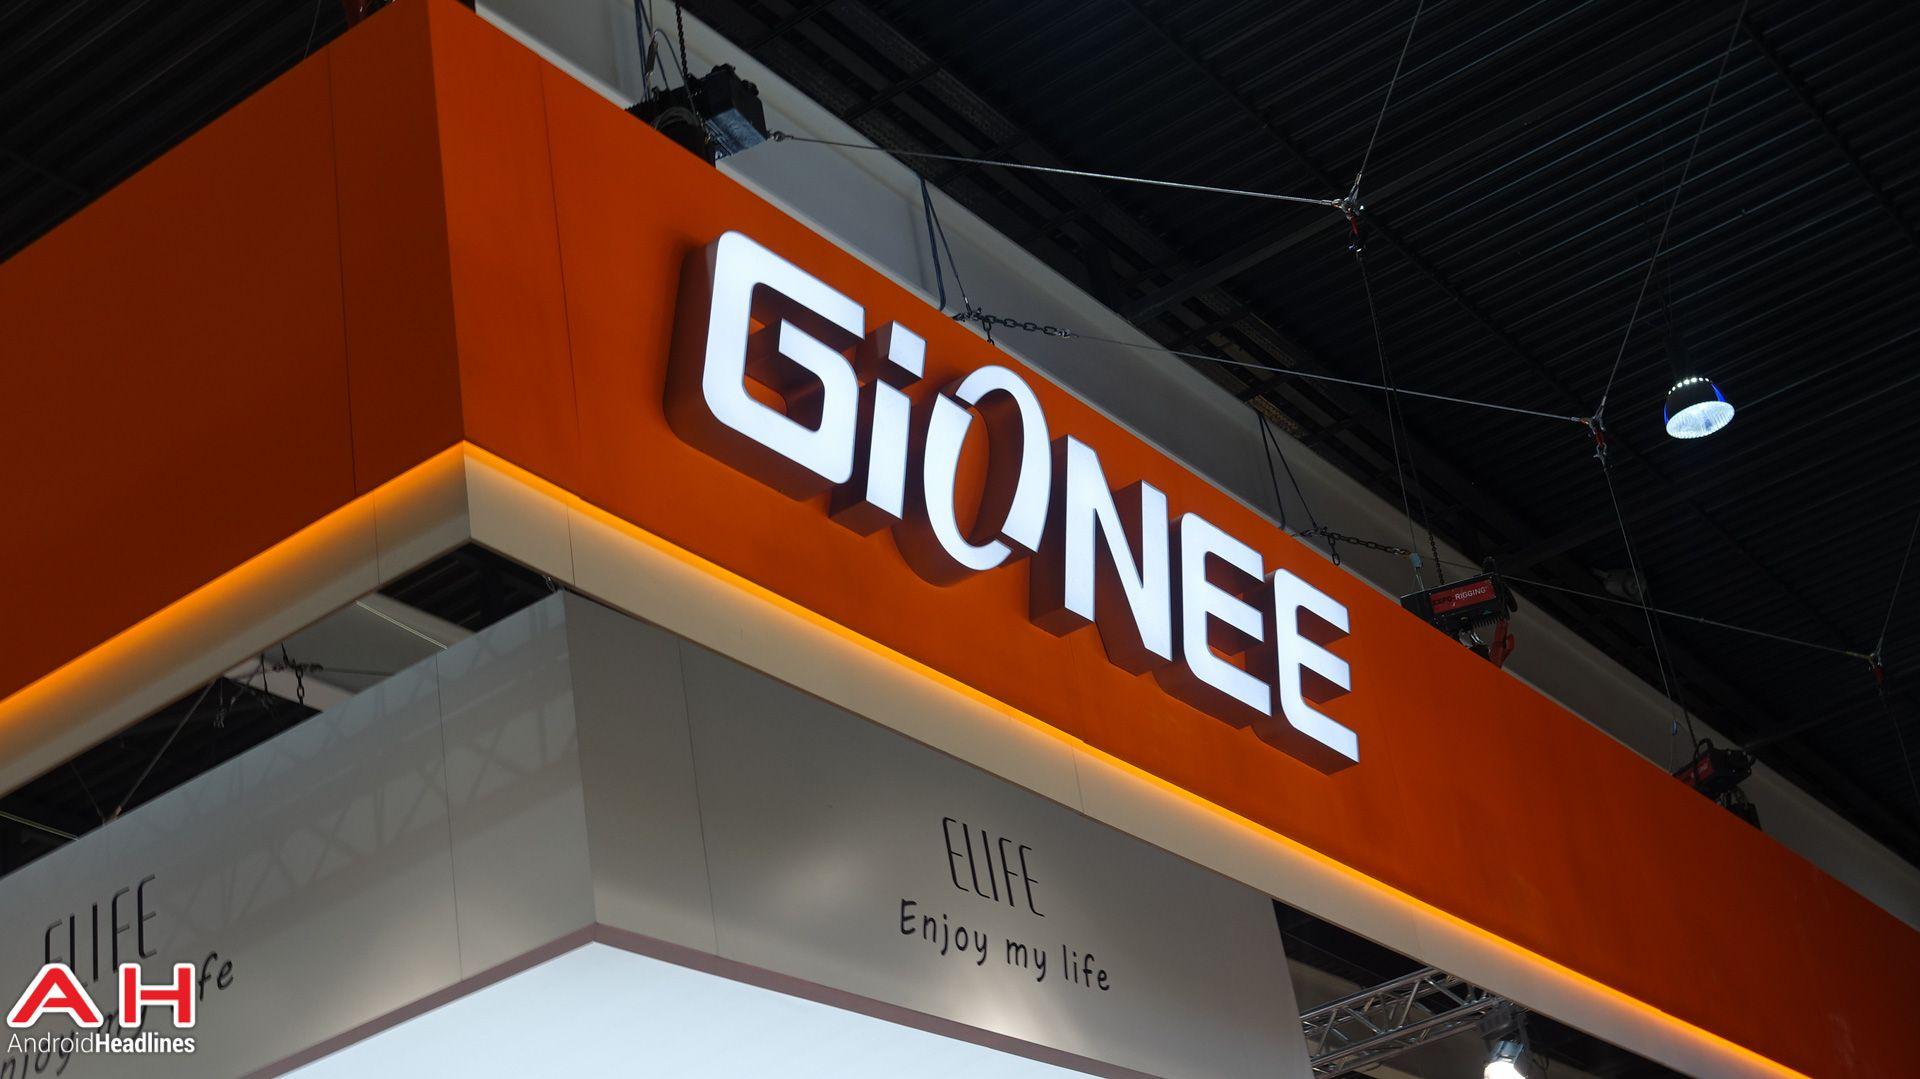 Gionee Logo - Gionee To Invest Up To $48 Million In Order To Set Up A